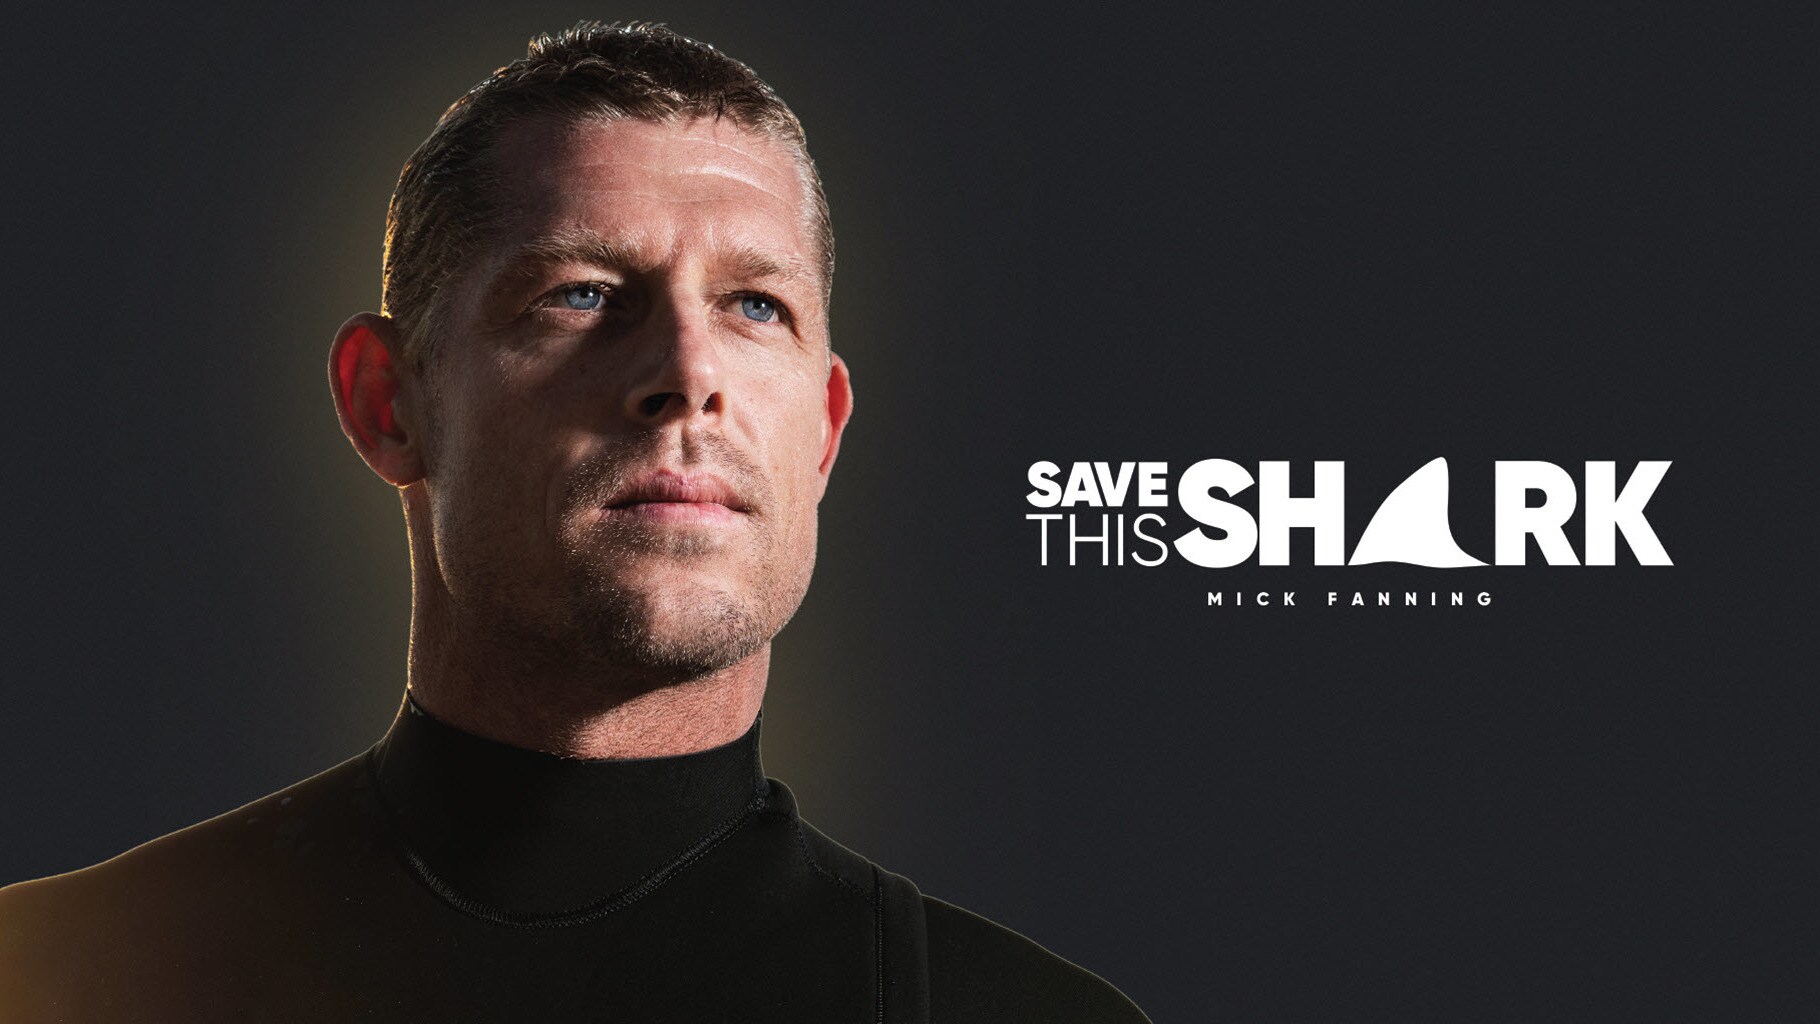 Save This Shark! And save the date for this new show from Nat Geo and Aussie legend, Mick Fanning